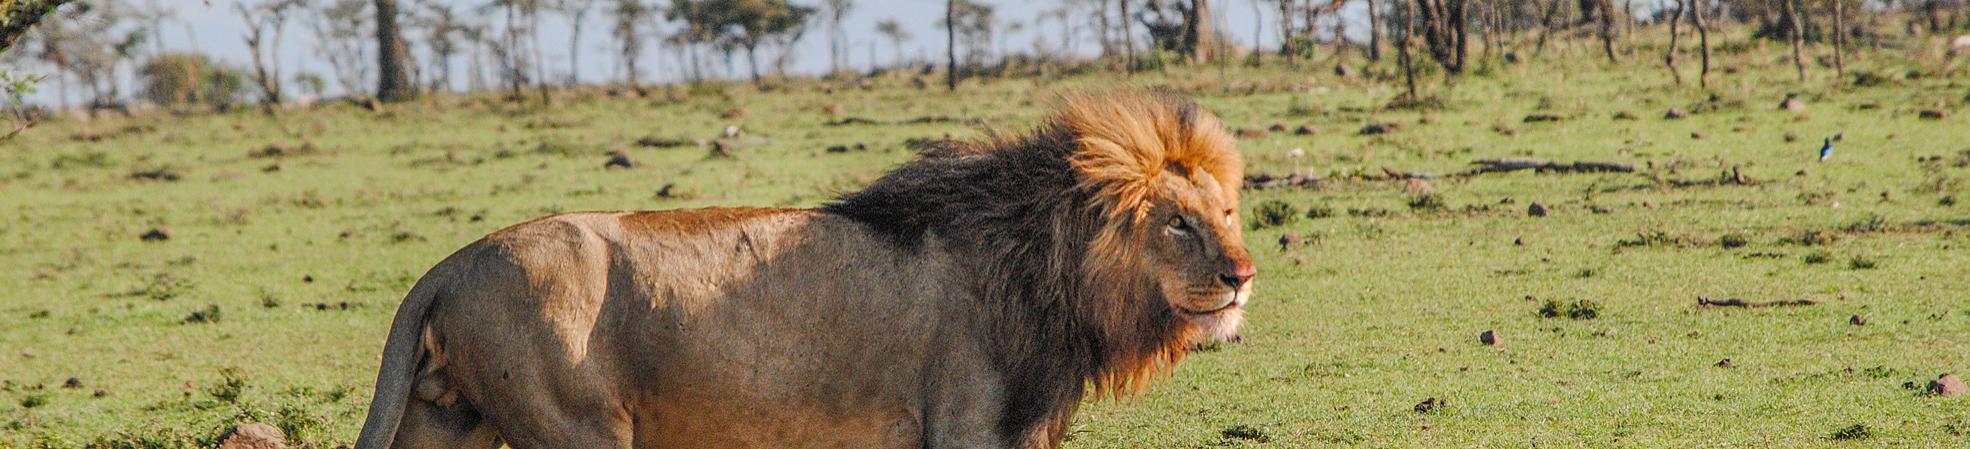 Meet the Real Lion King in Africa